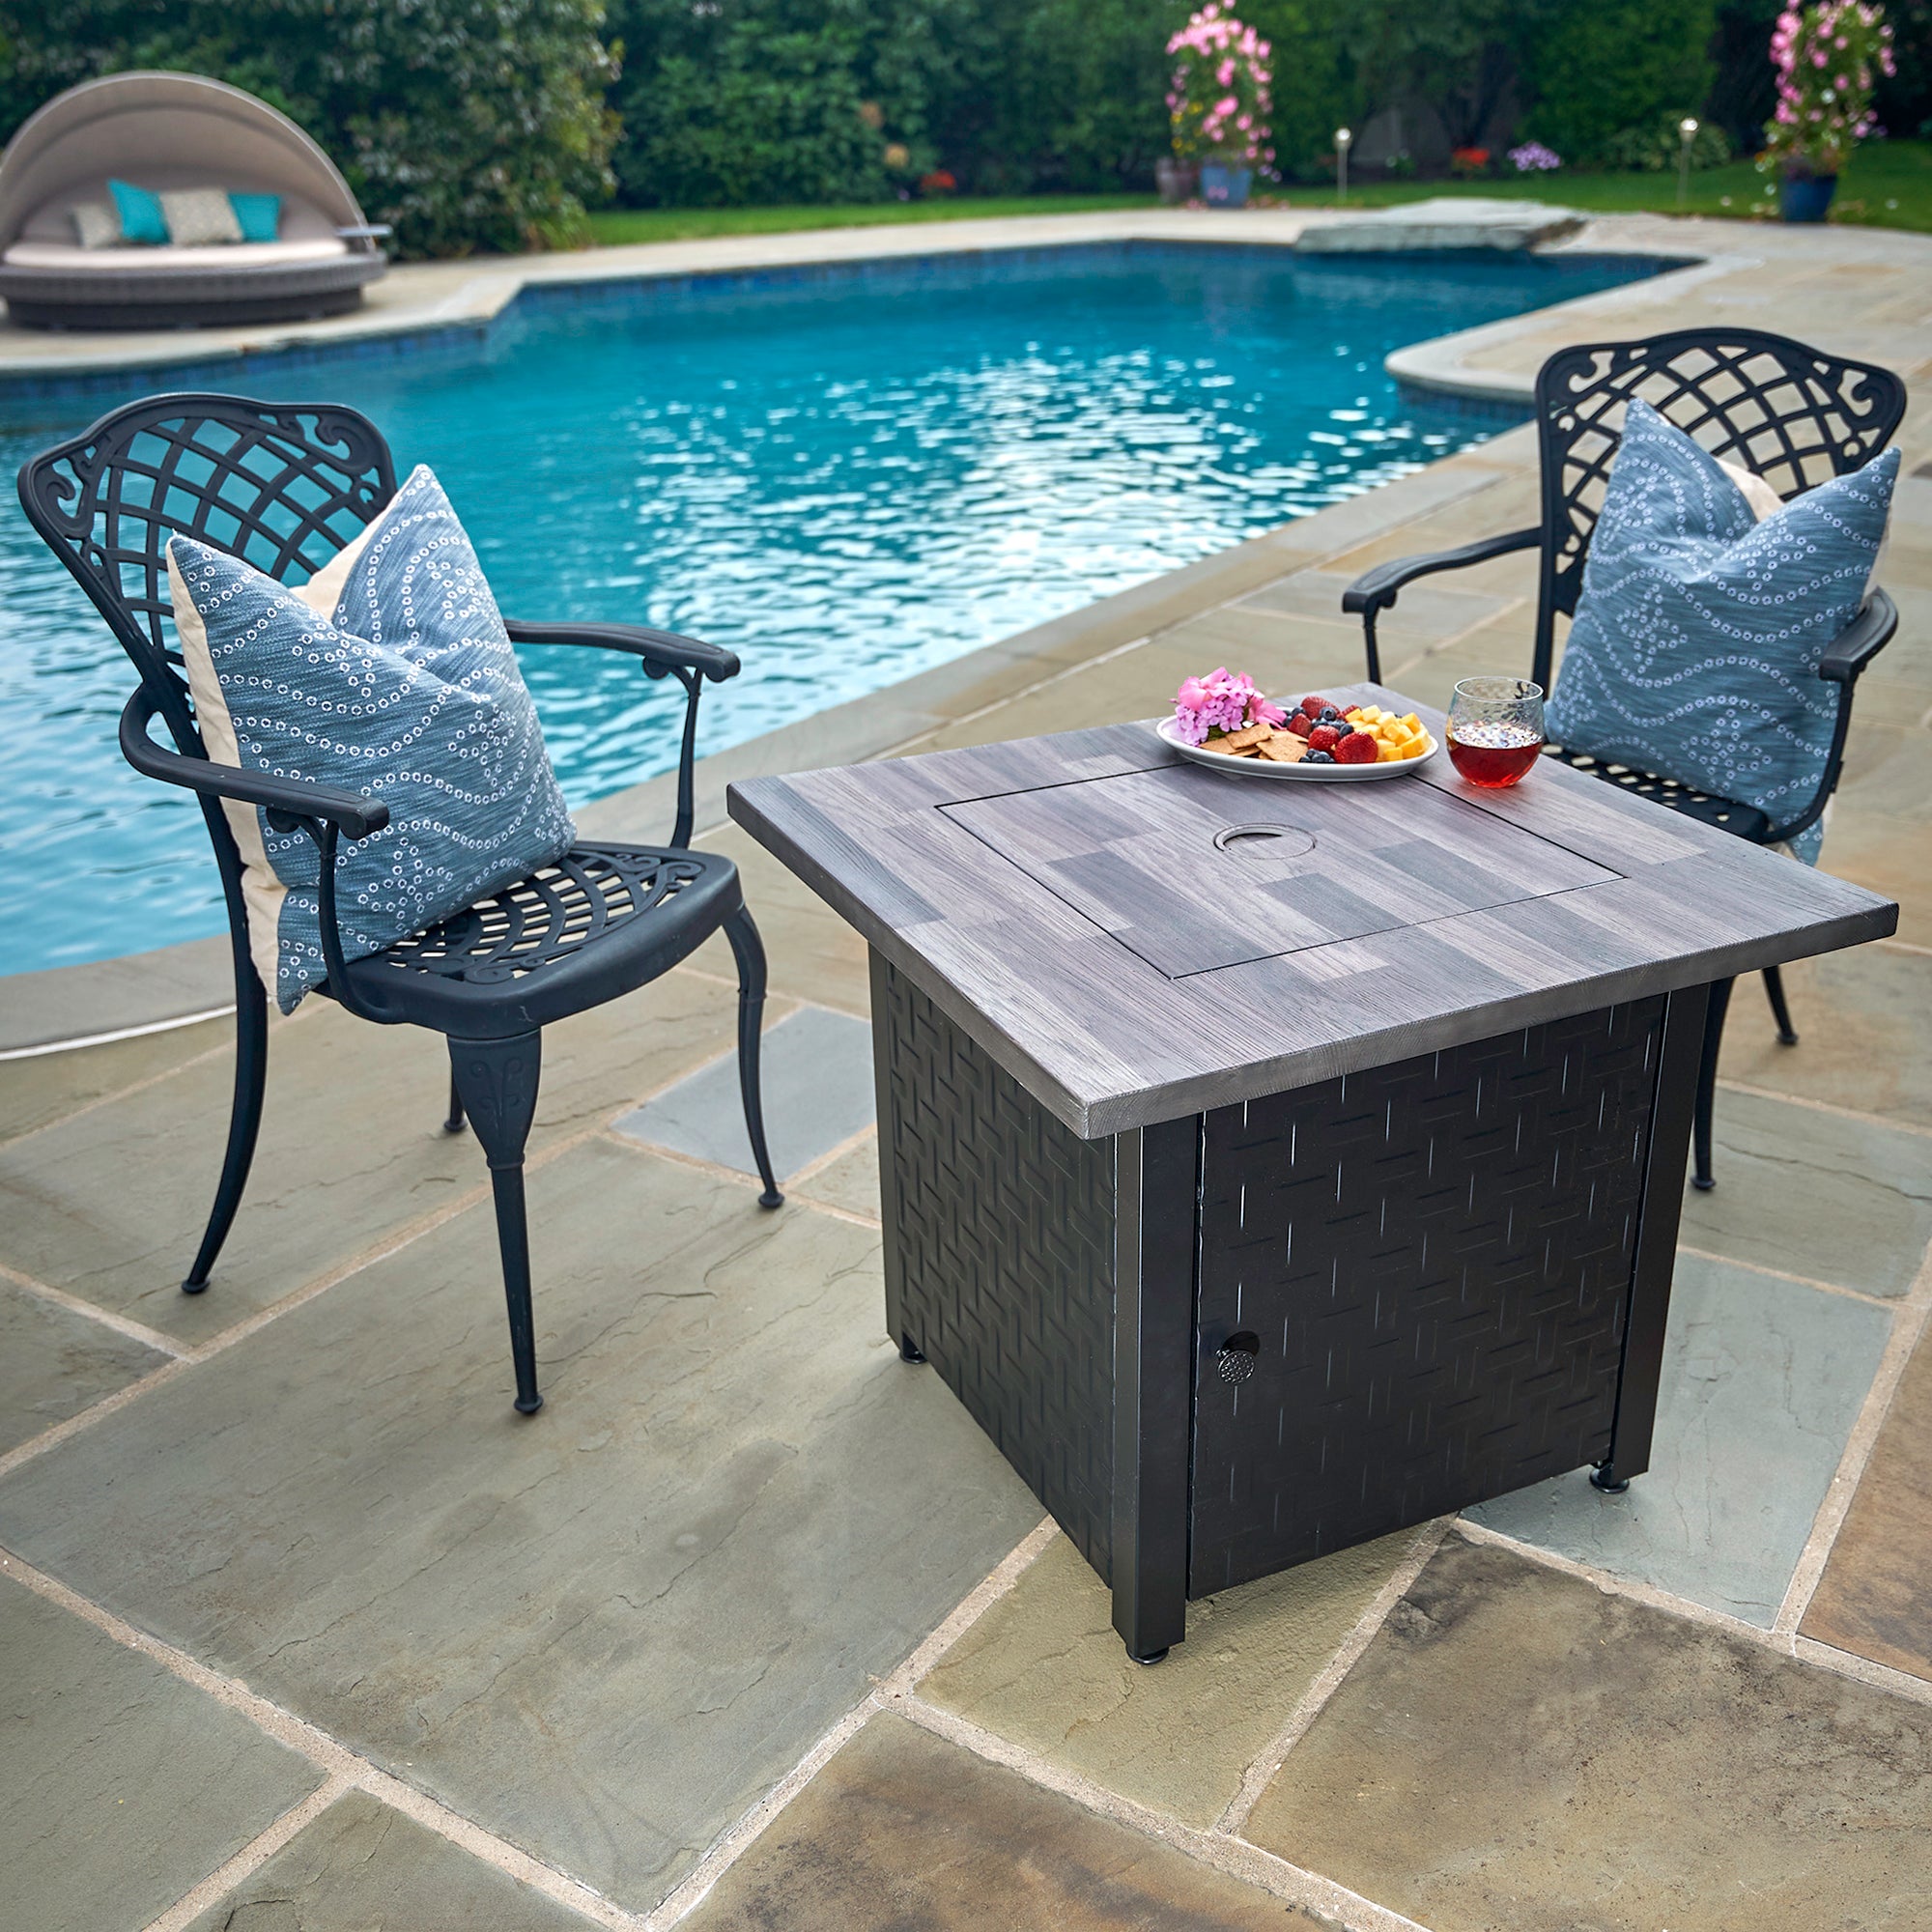 Endless Summer The Bristol, LP Gas Outdoor Fire Pit with UV Marble Look Ceramic Tile Mantel